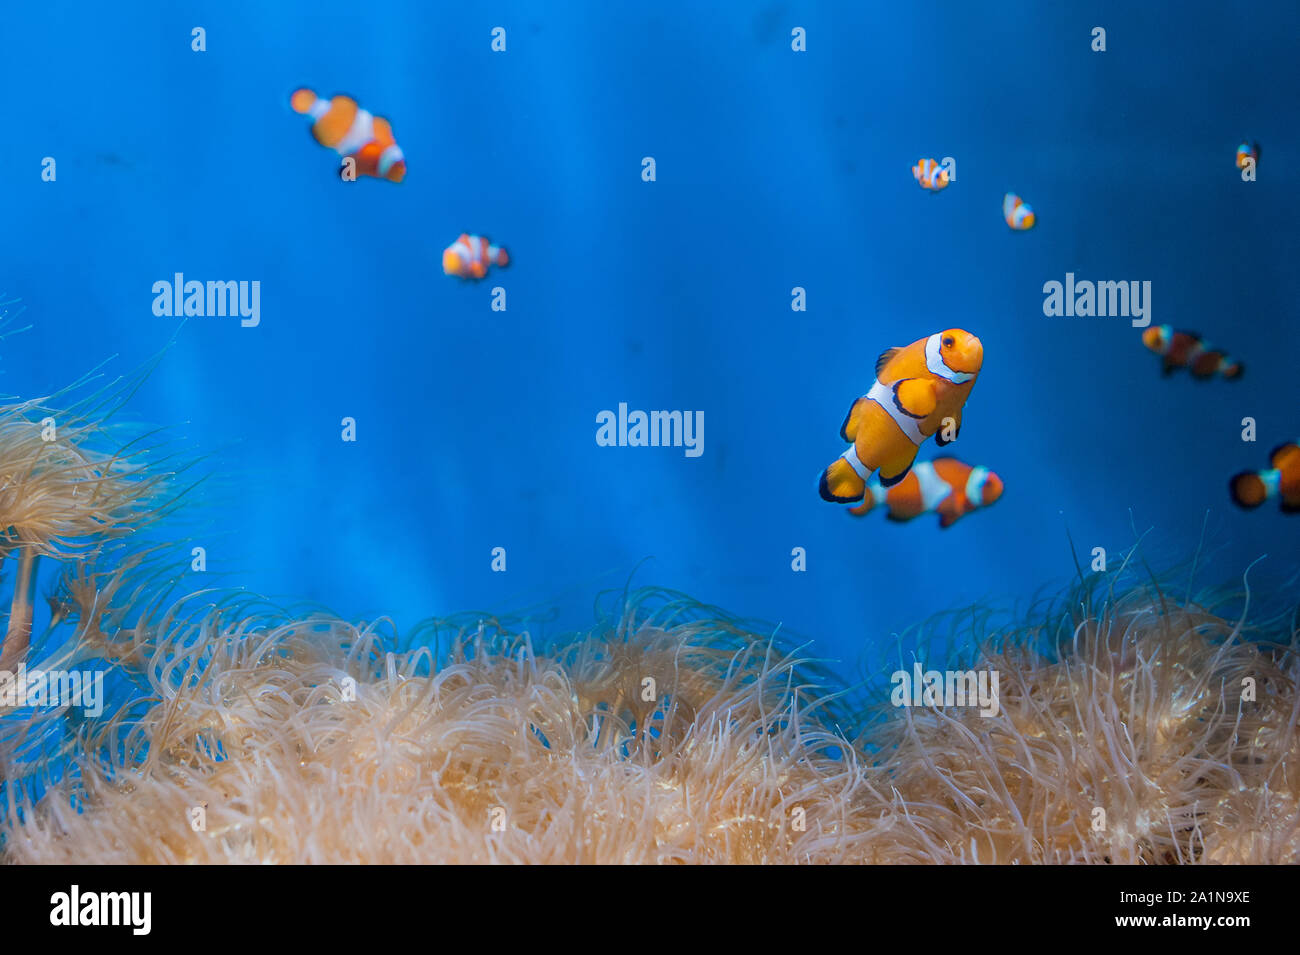 Clown fish and anemones on a blue background Stock Photo